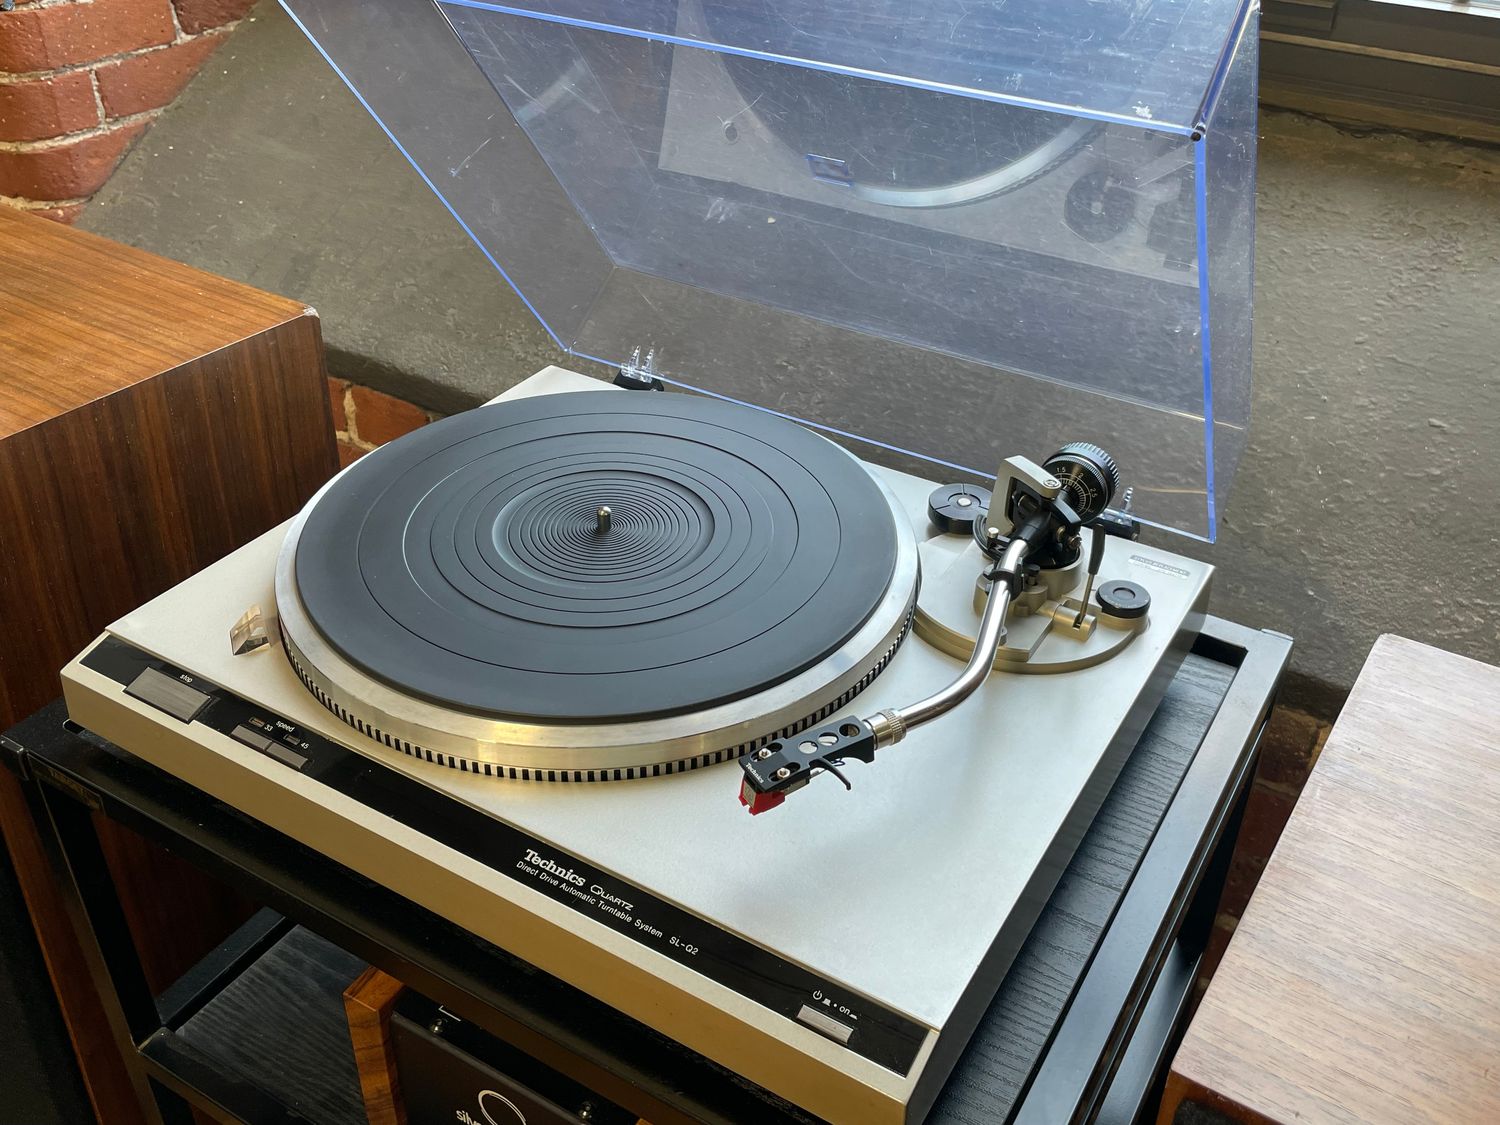 What Is The Function Of Quartz Lock On Turntable